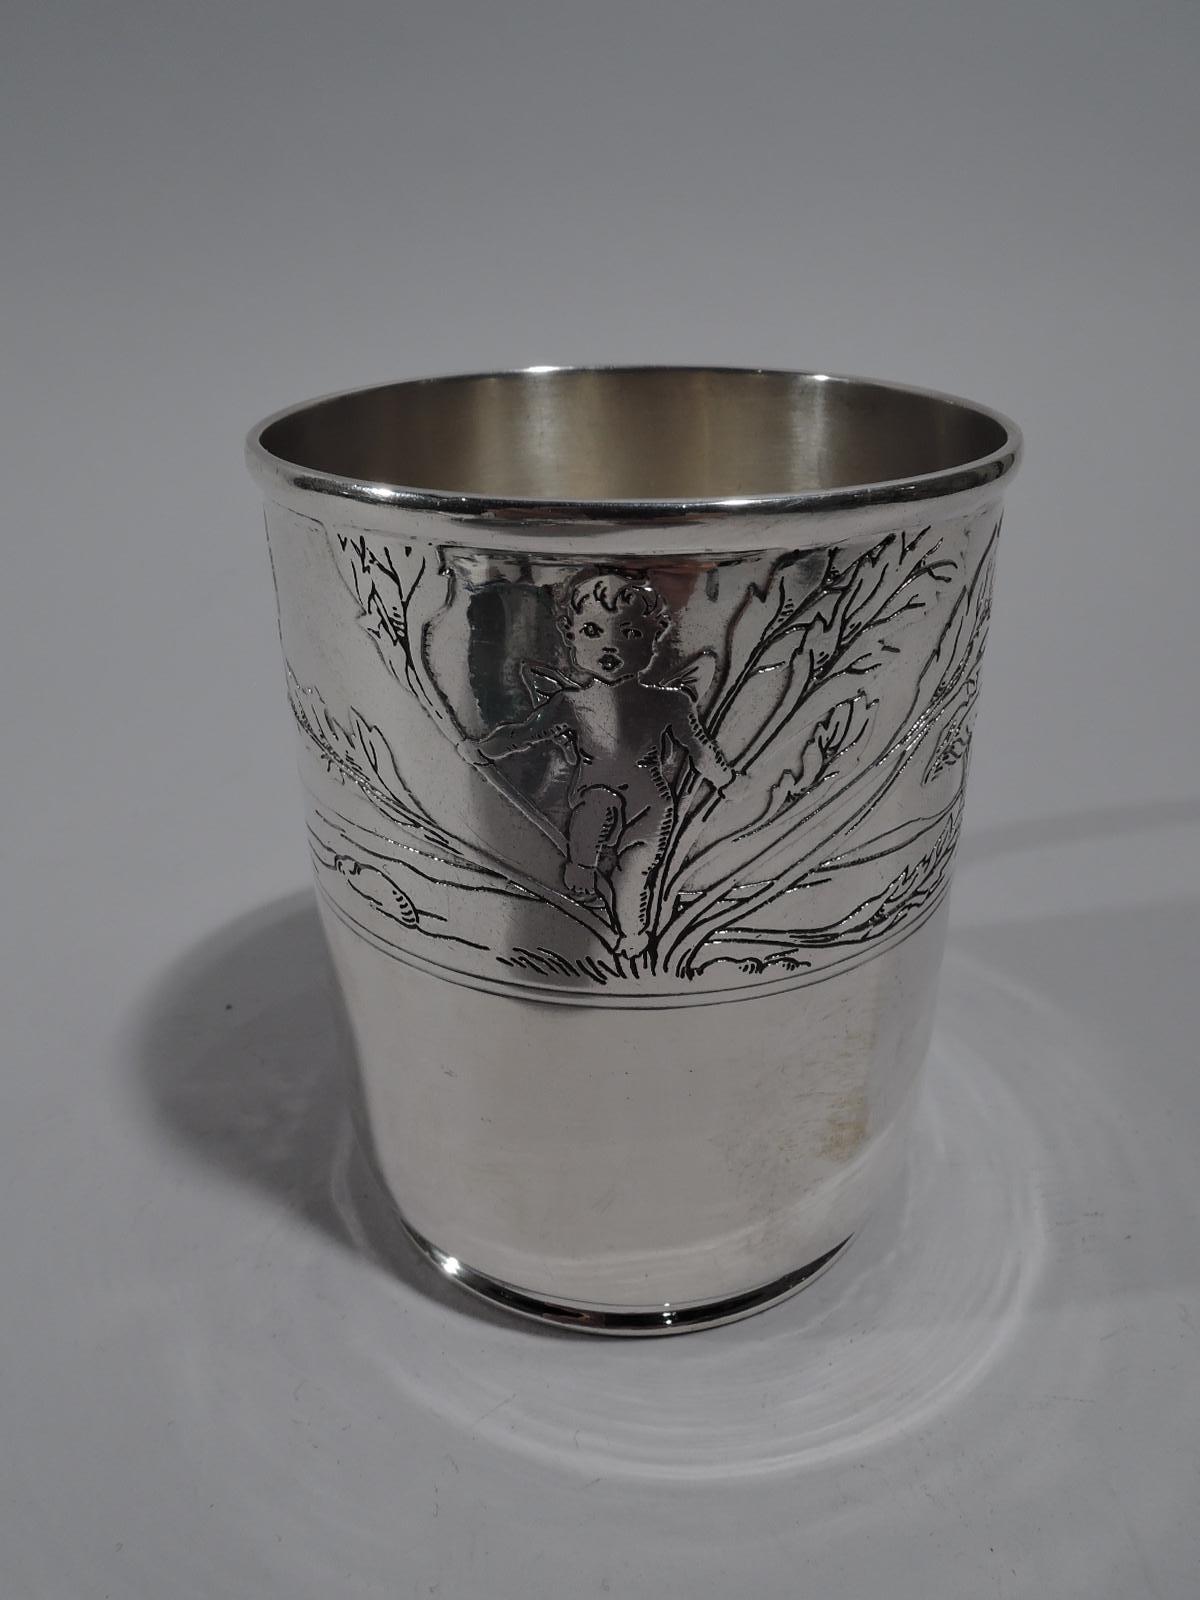 Art Nouveau sterling silver baby cup. Made by Tiffany & Co. in New York, circa 1910. Straight sides, short inset foot, and C-scroll handle. Slightly hallucinatory acid-etched frieze with cherubs frolicking amidst aquatic foliage and giant mushrooms.